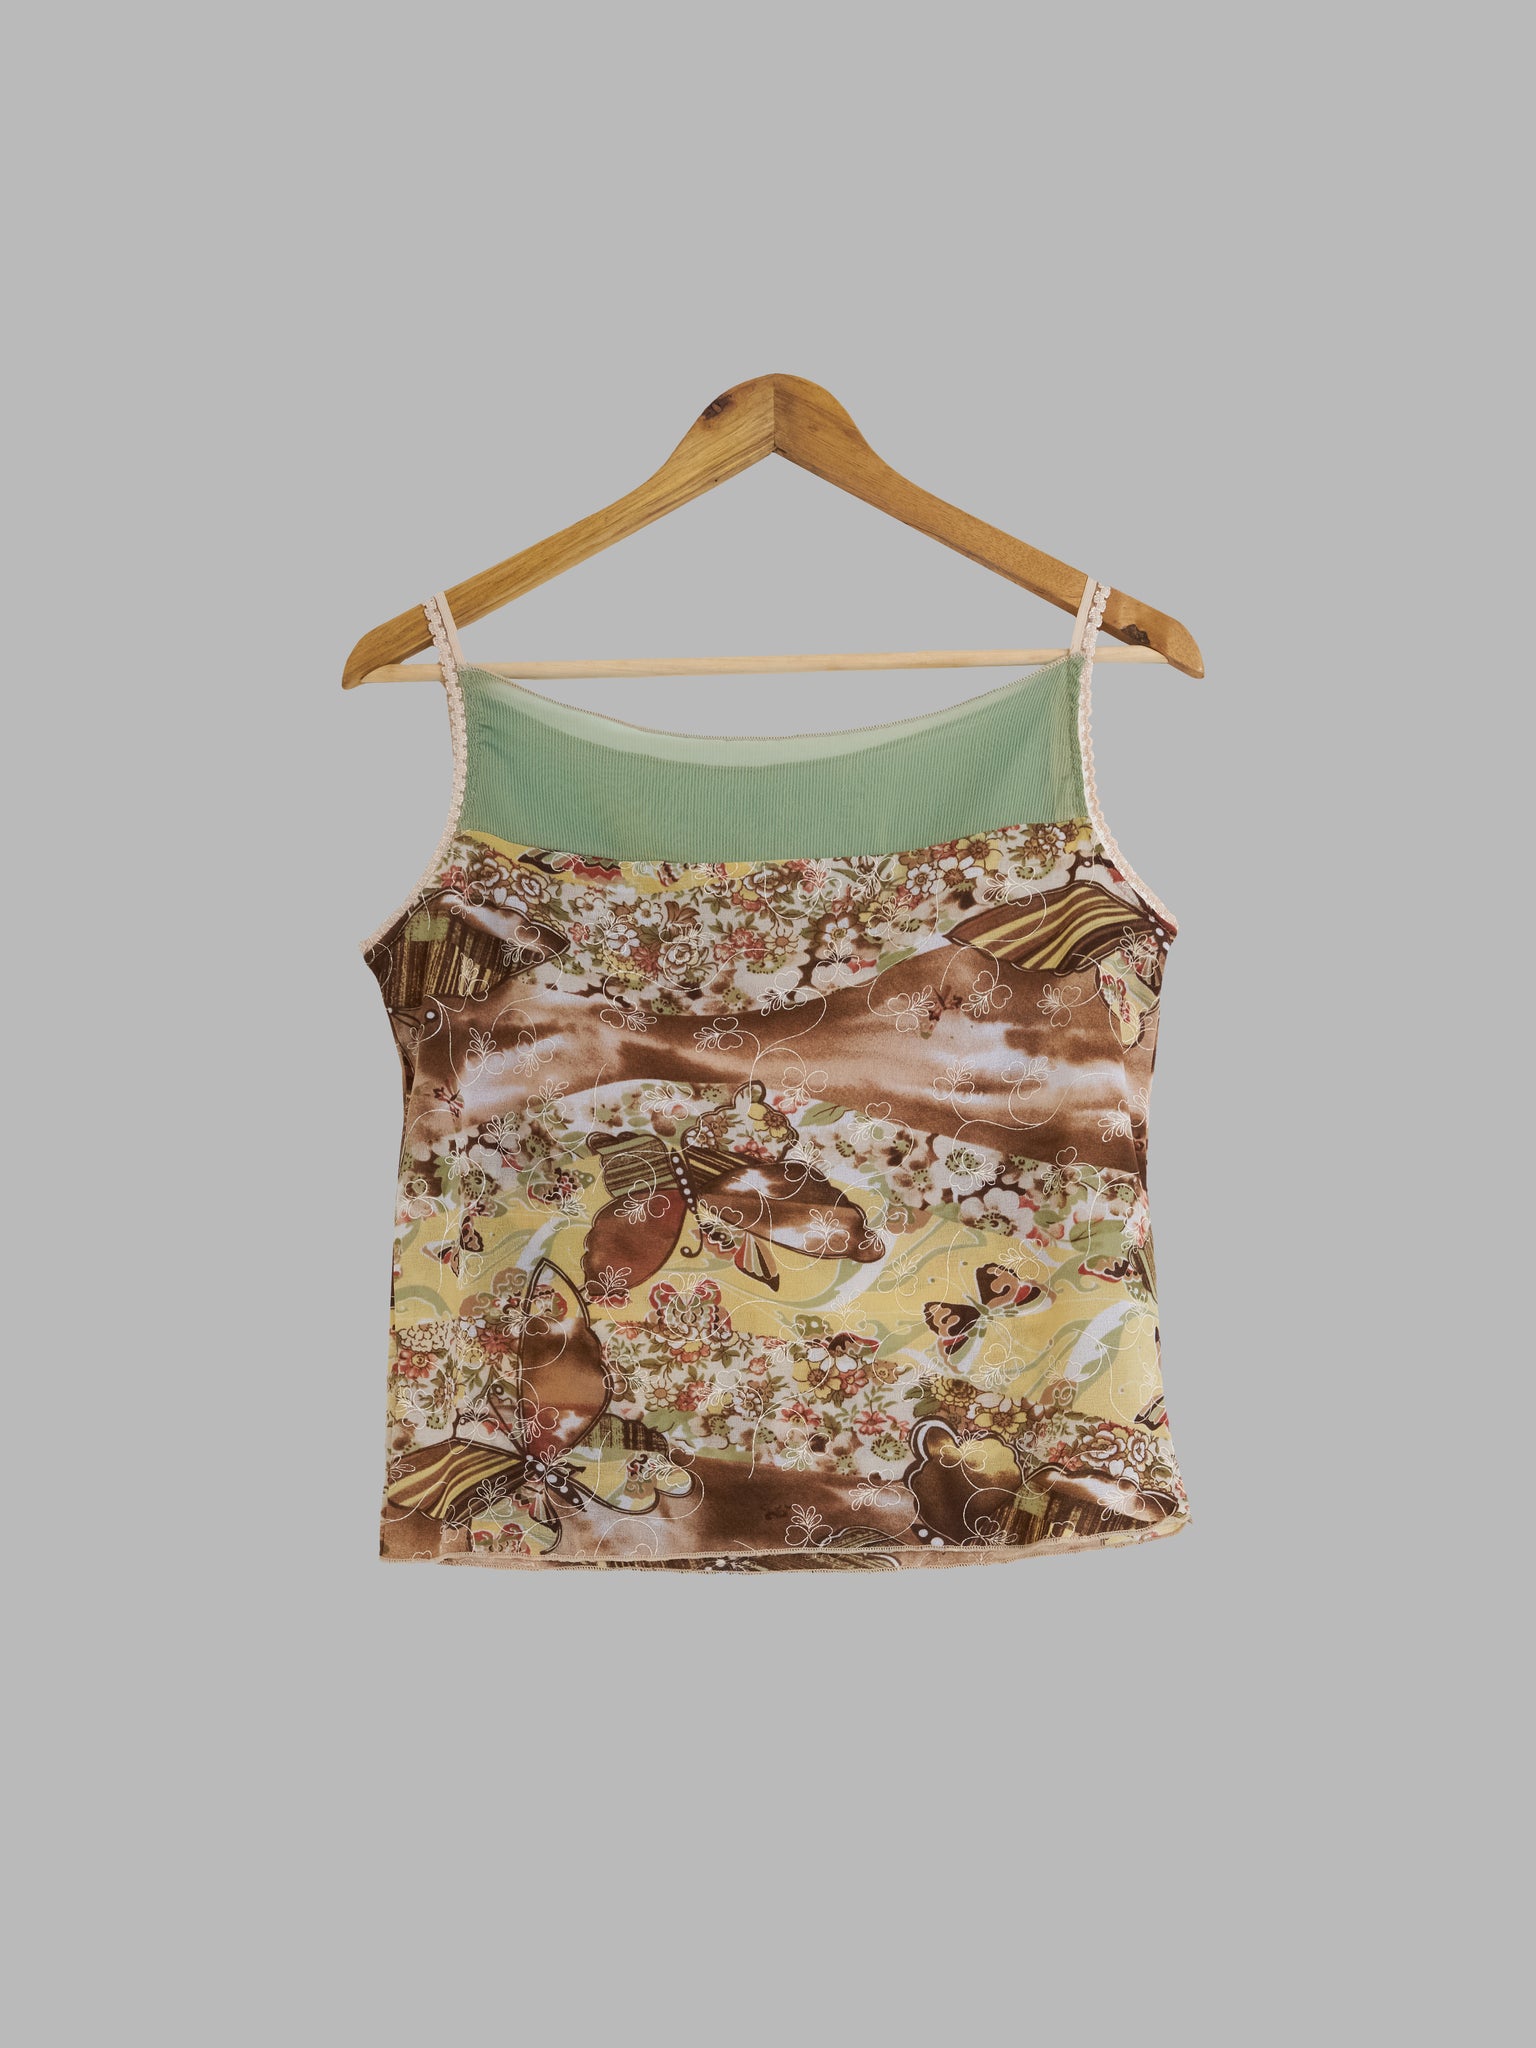 Vintage semi sheer brown green floral multi fabric camisole top